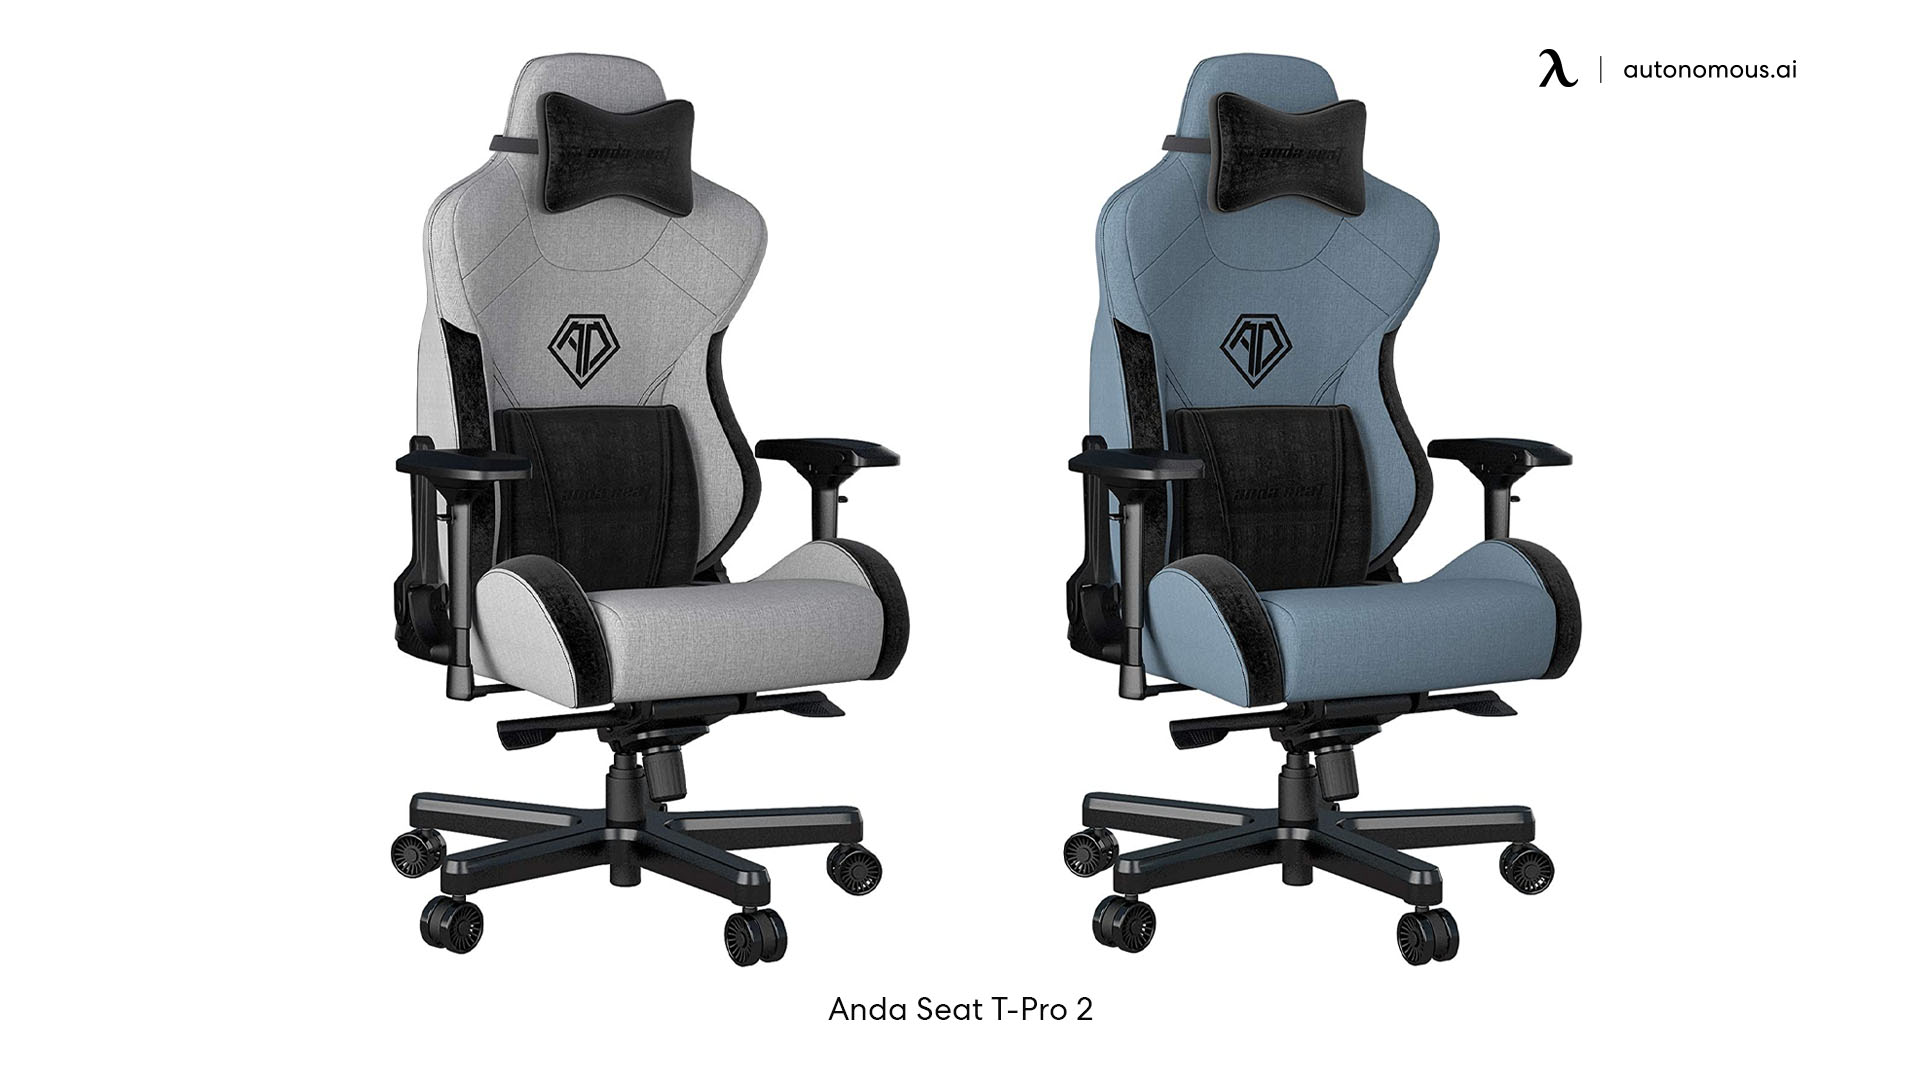 Anda Seat T-Pro 2 fully adjustable gaming chair